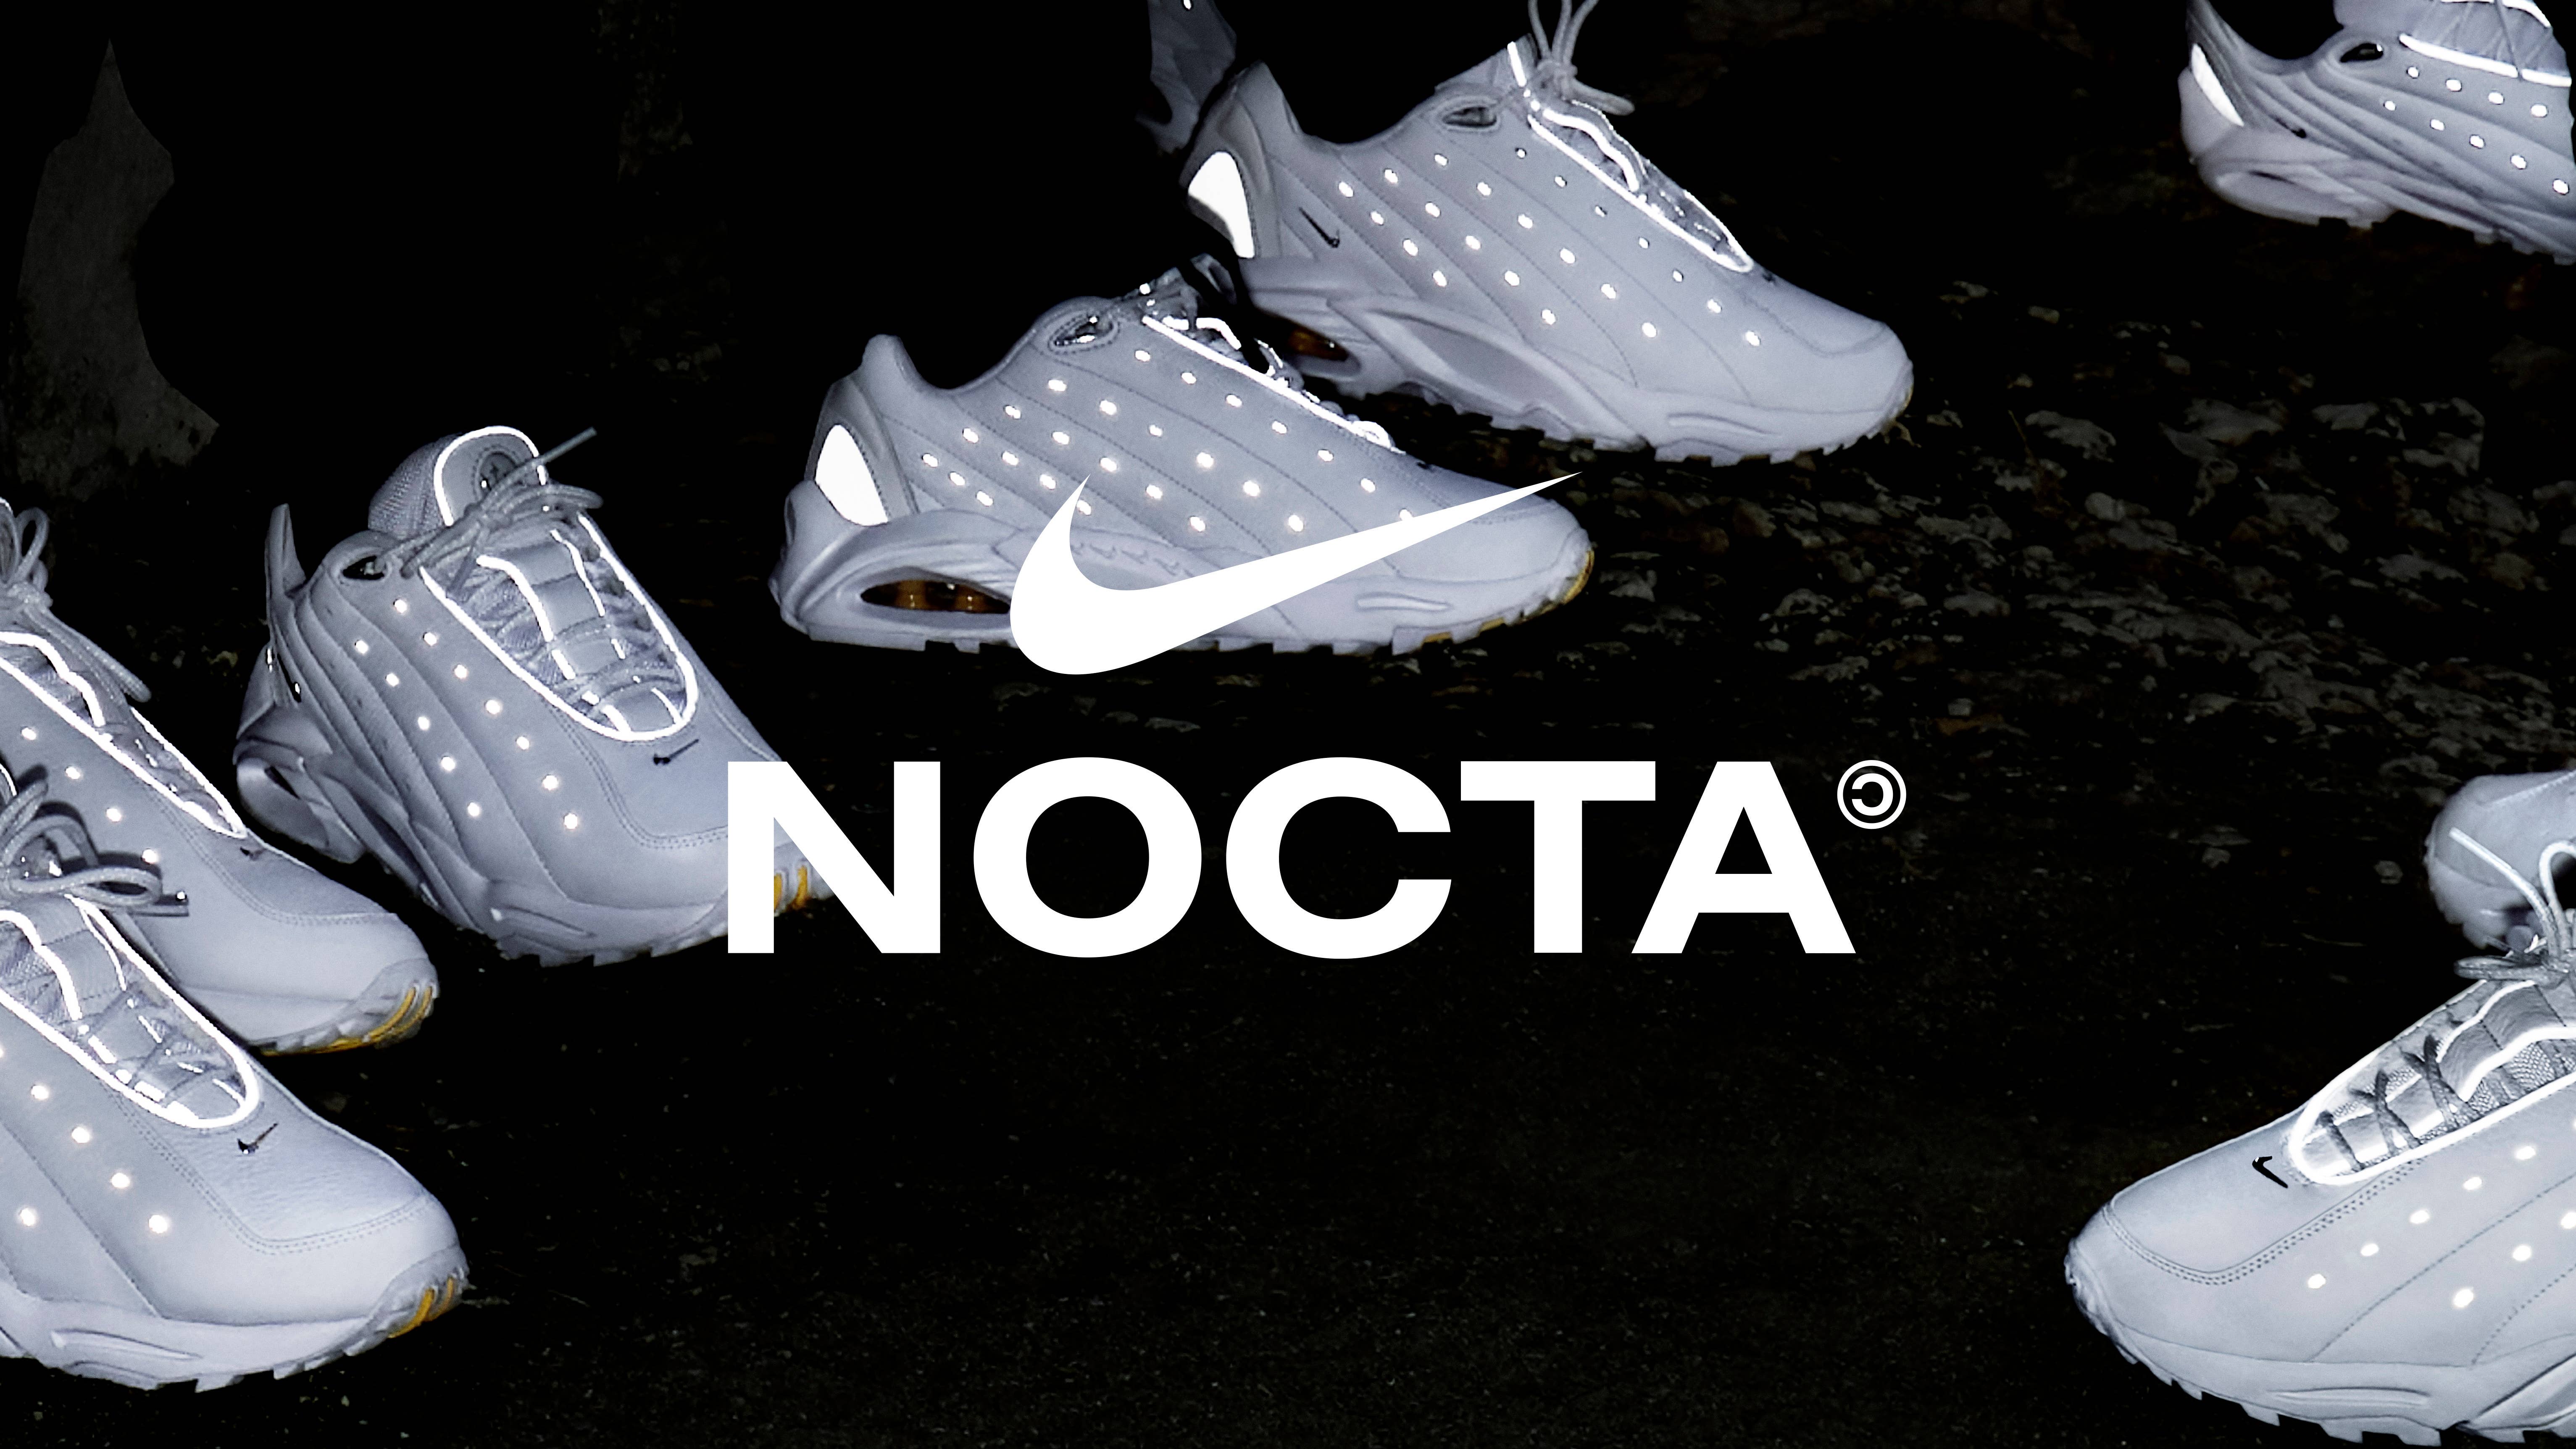 The triple-white Nike Nocta Hot Step sneakers from Drake on feet